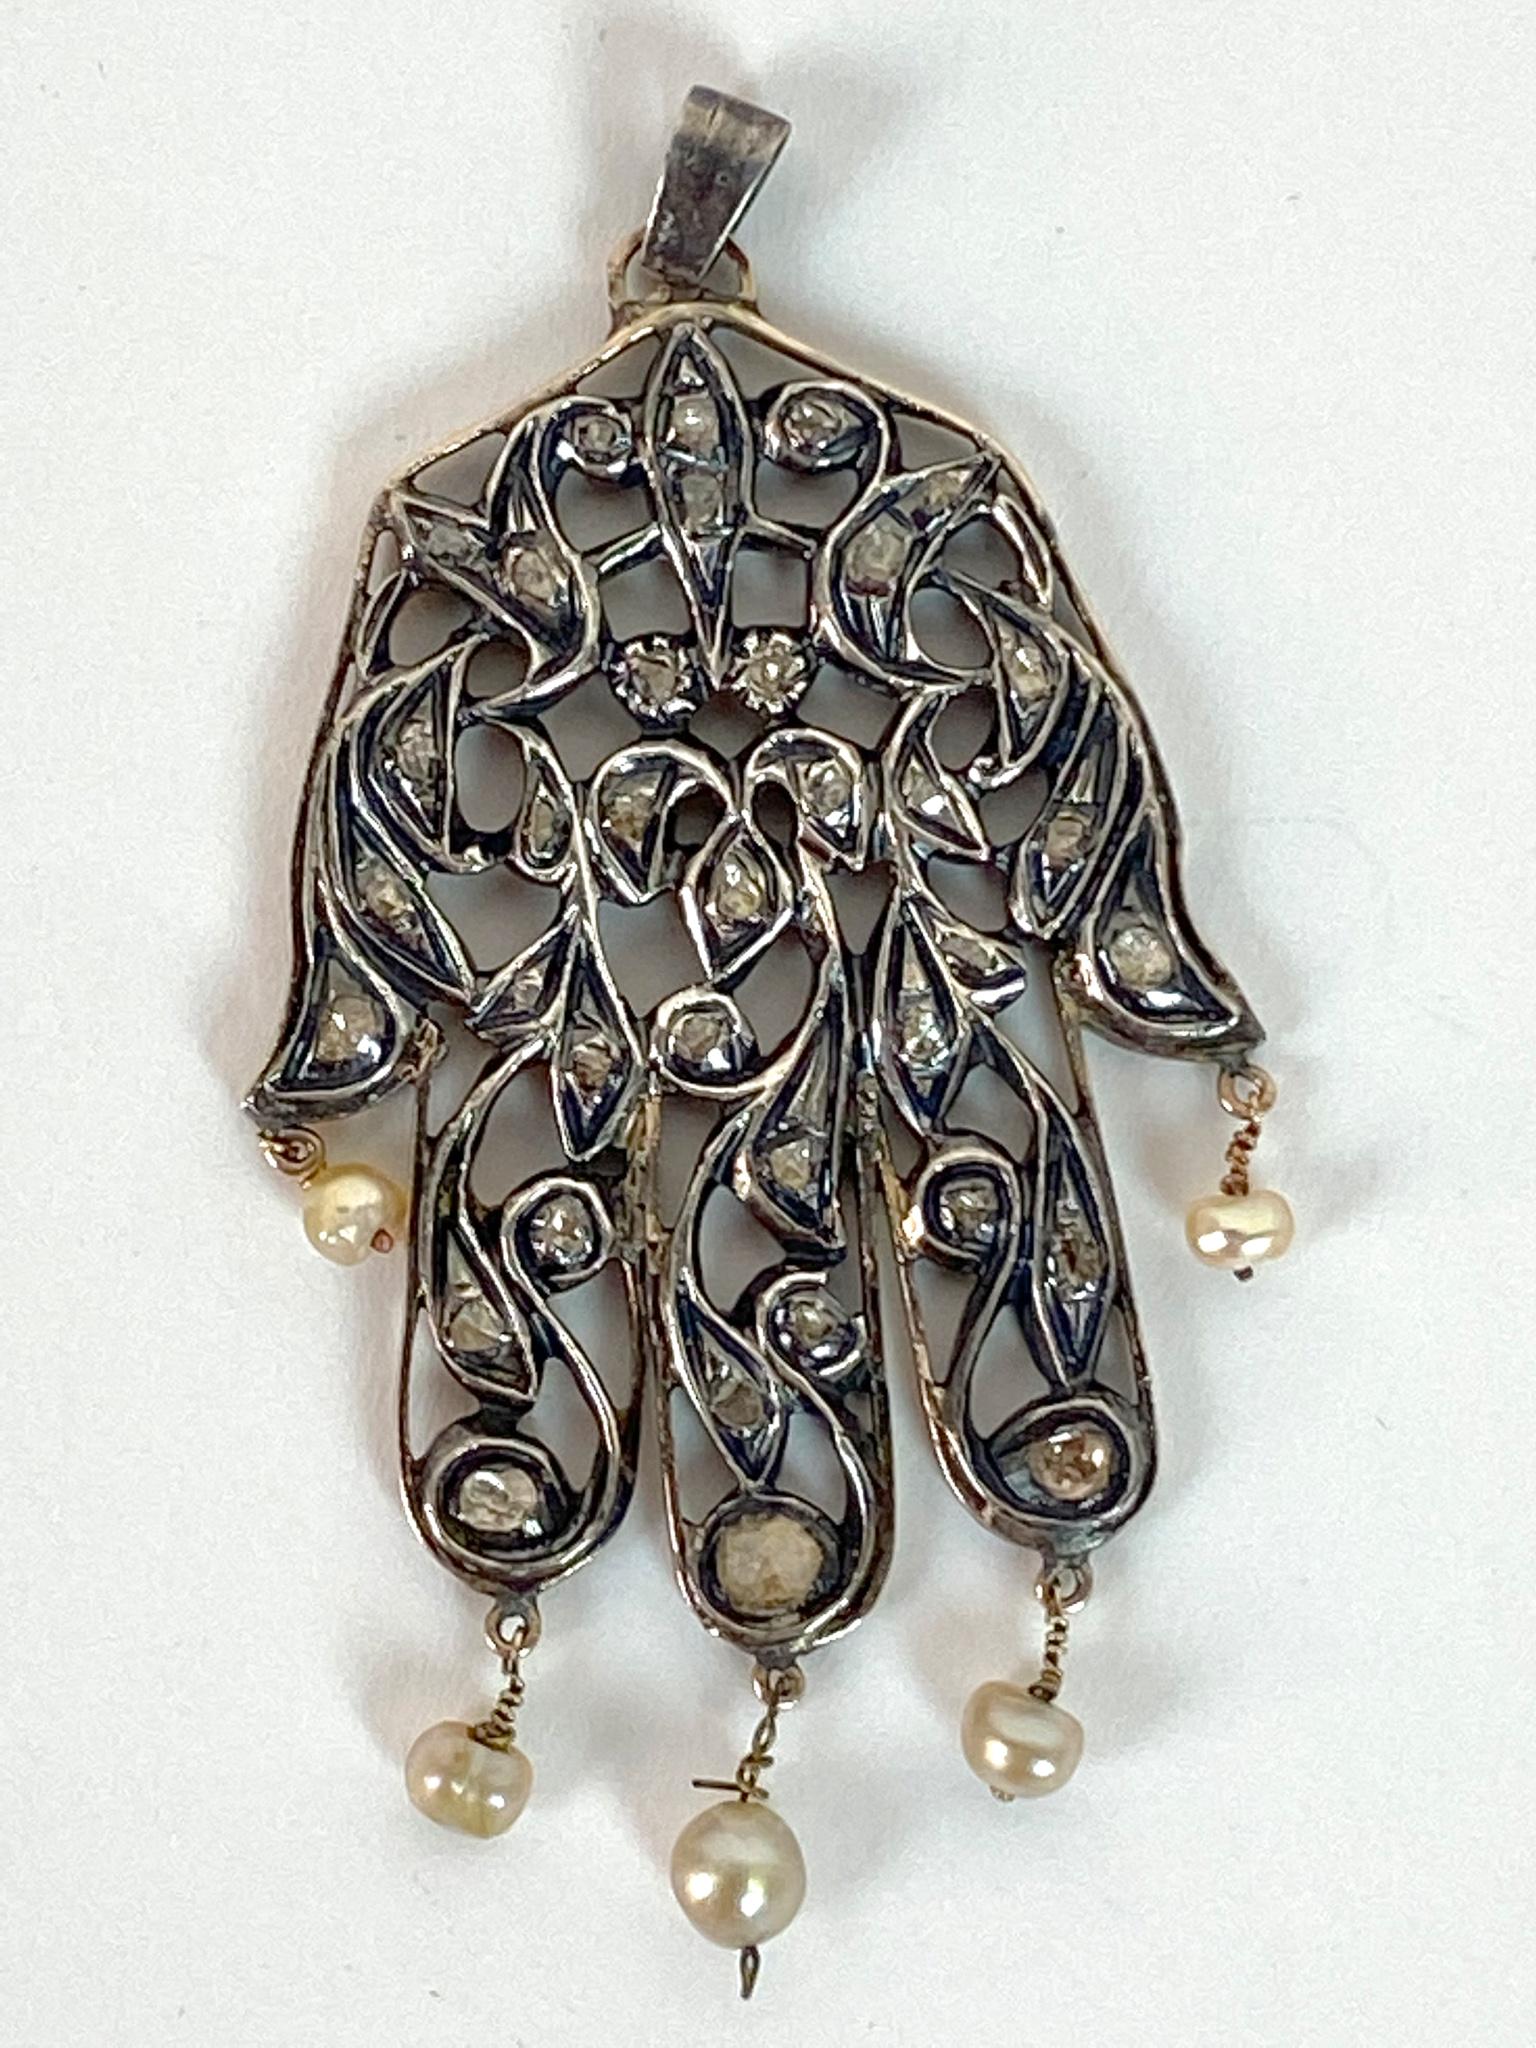 Vintage Tribal Indian Sterling Silver Hand Pendant with Pearls and Rough Cut Diamonds